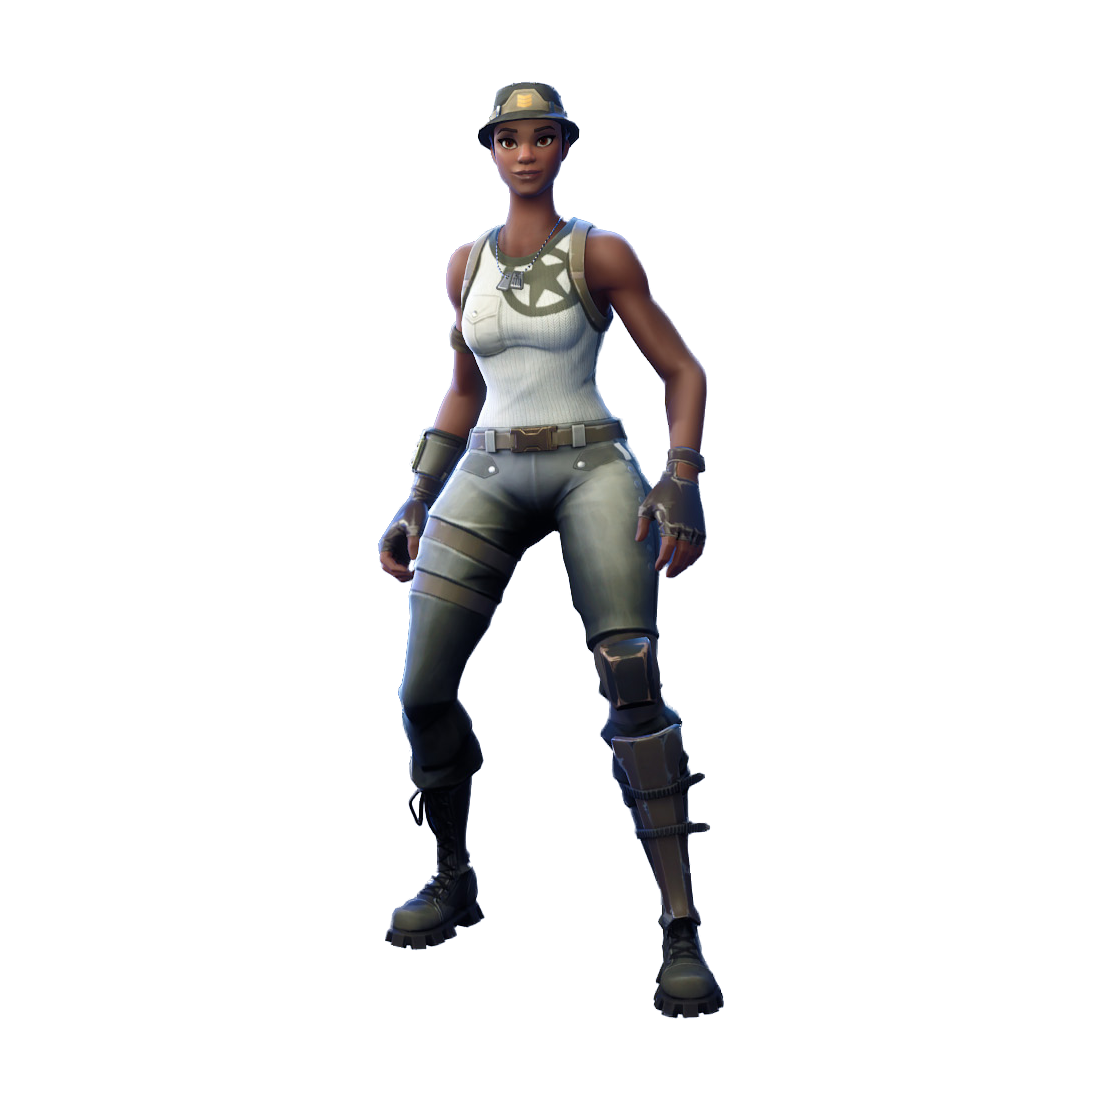 Recon Expert Outfit. Fortnite Battle Royale